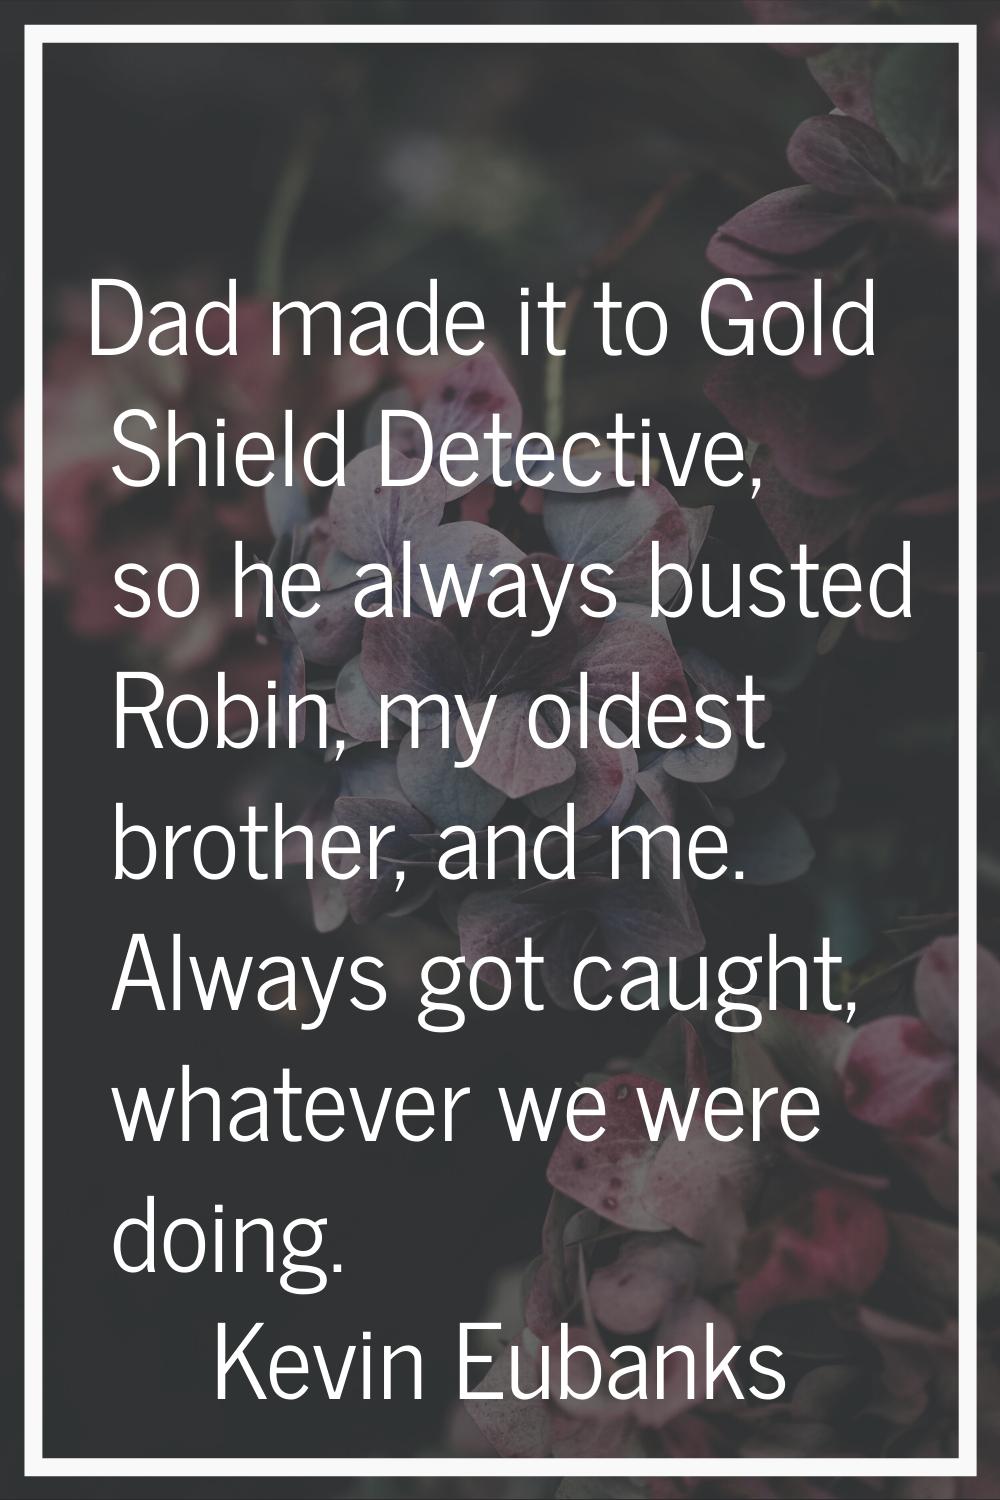 Dad made it to Gold Shield Detective, so he always busted Robin, my oldest brother, and me. Always 